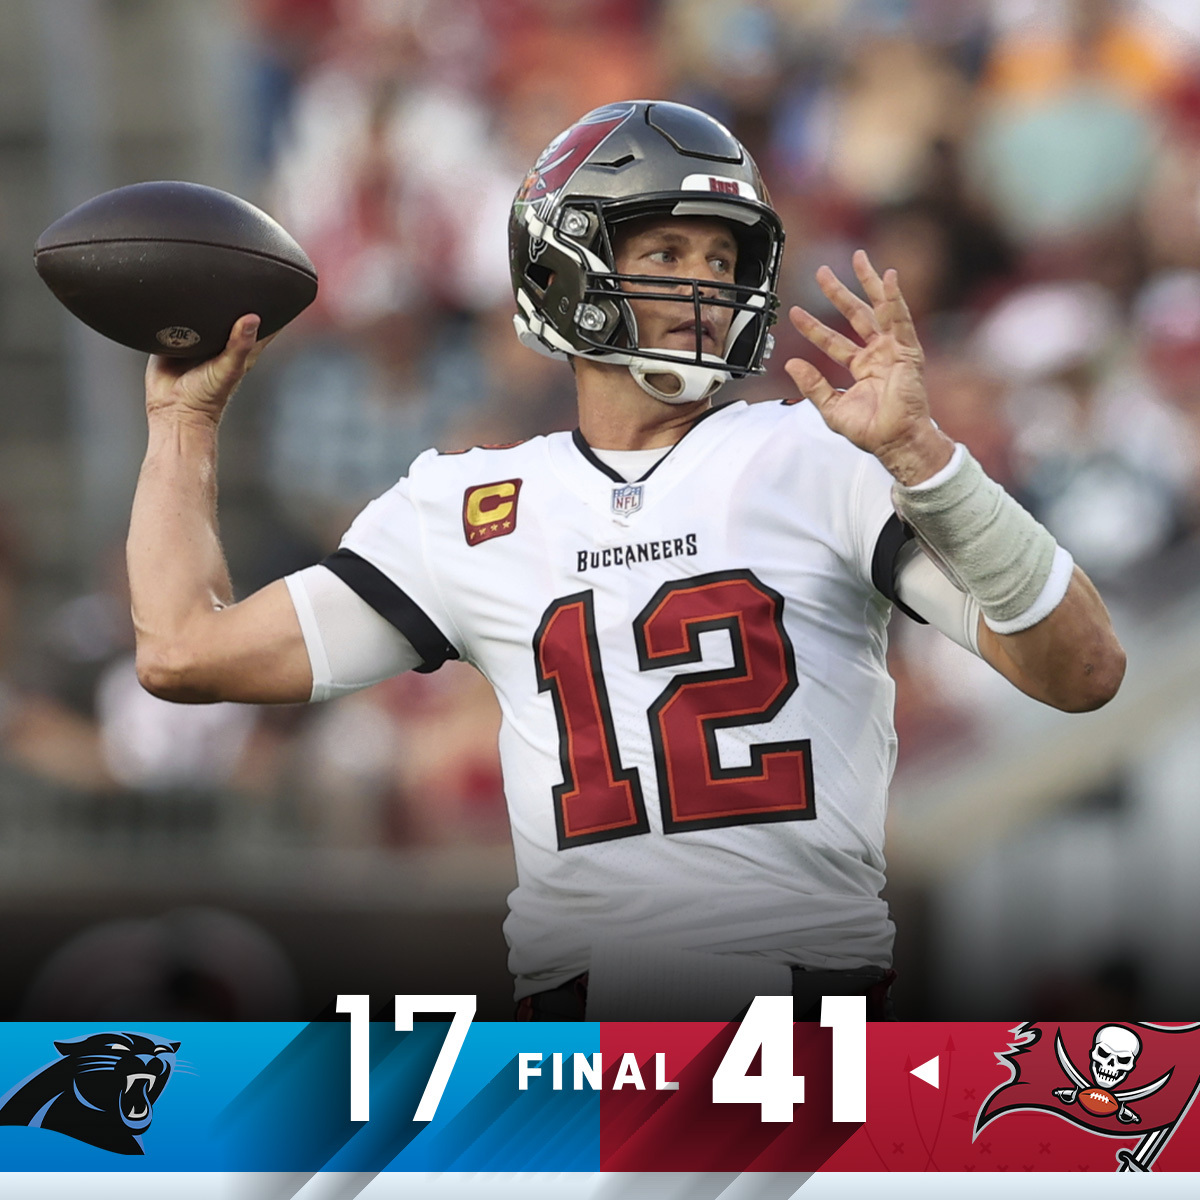 NFL on X: 'FINAL: @Buccaneers finish with a 13-4 record! #GoBucs